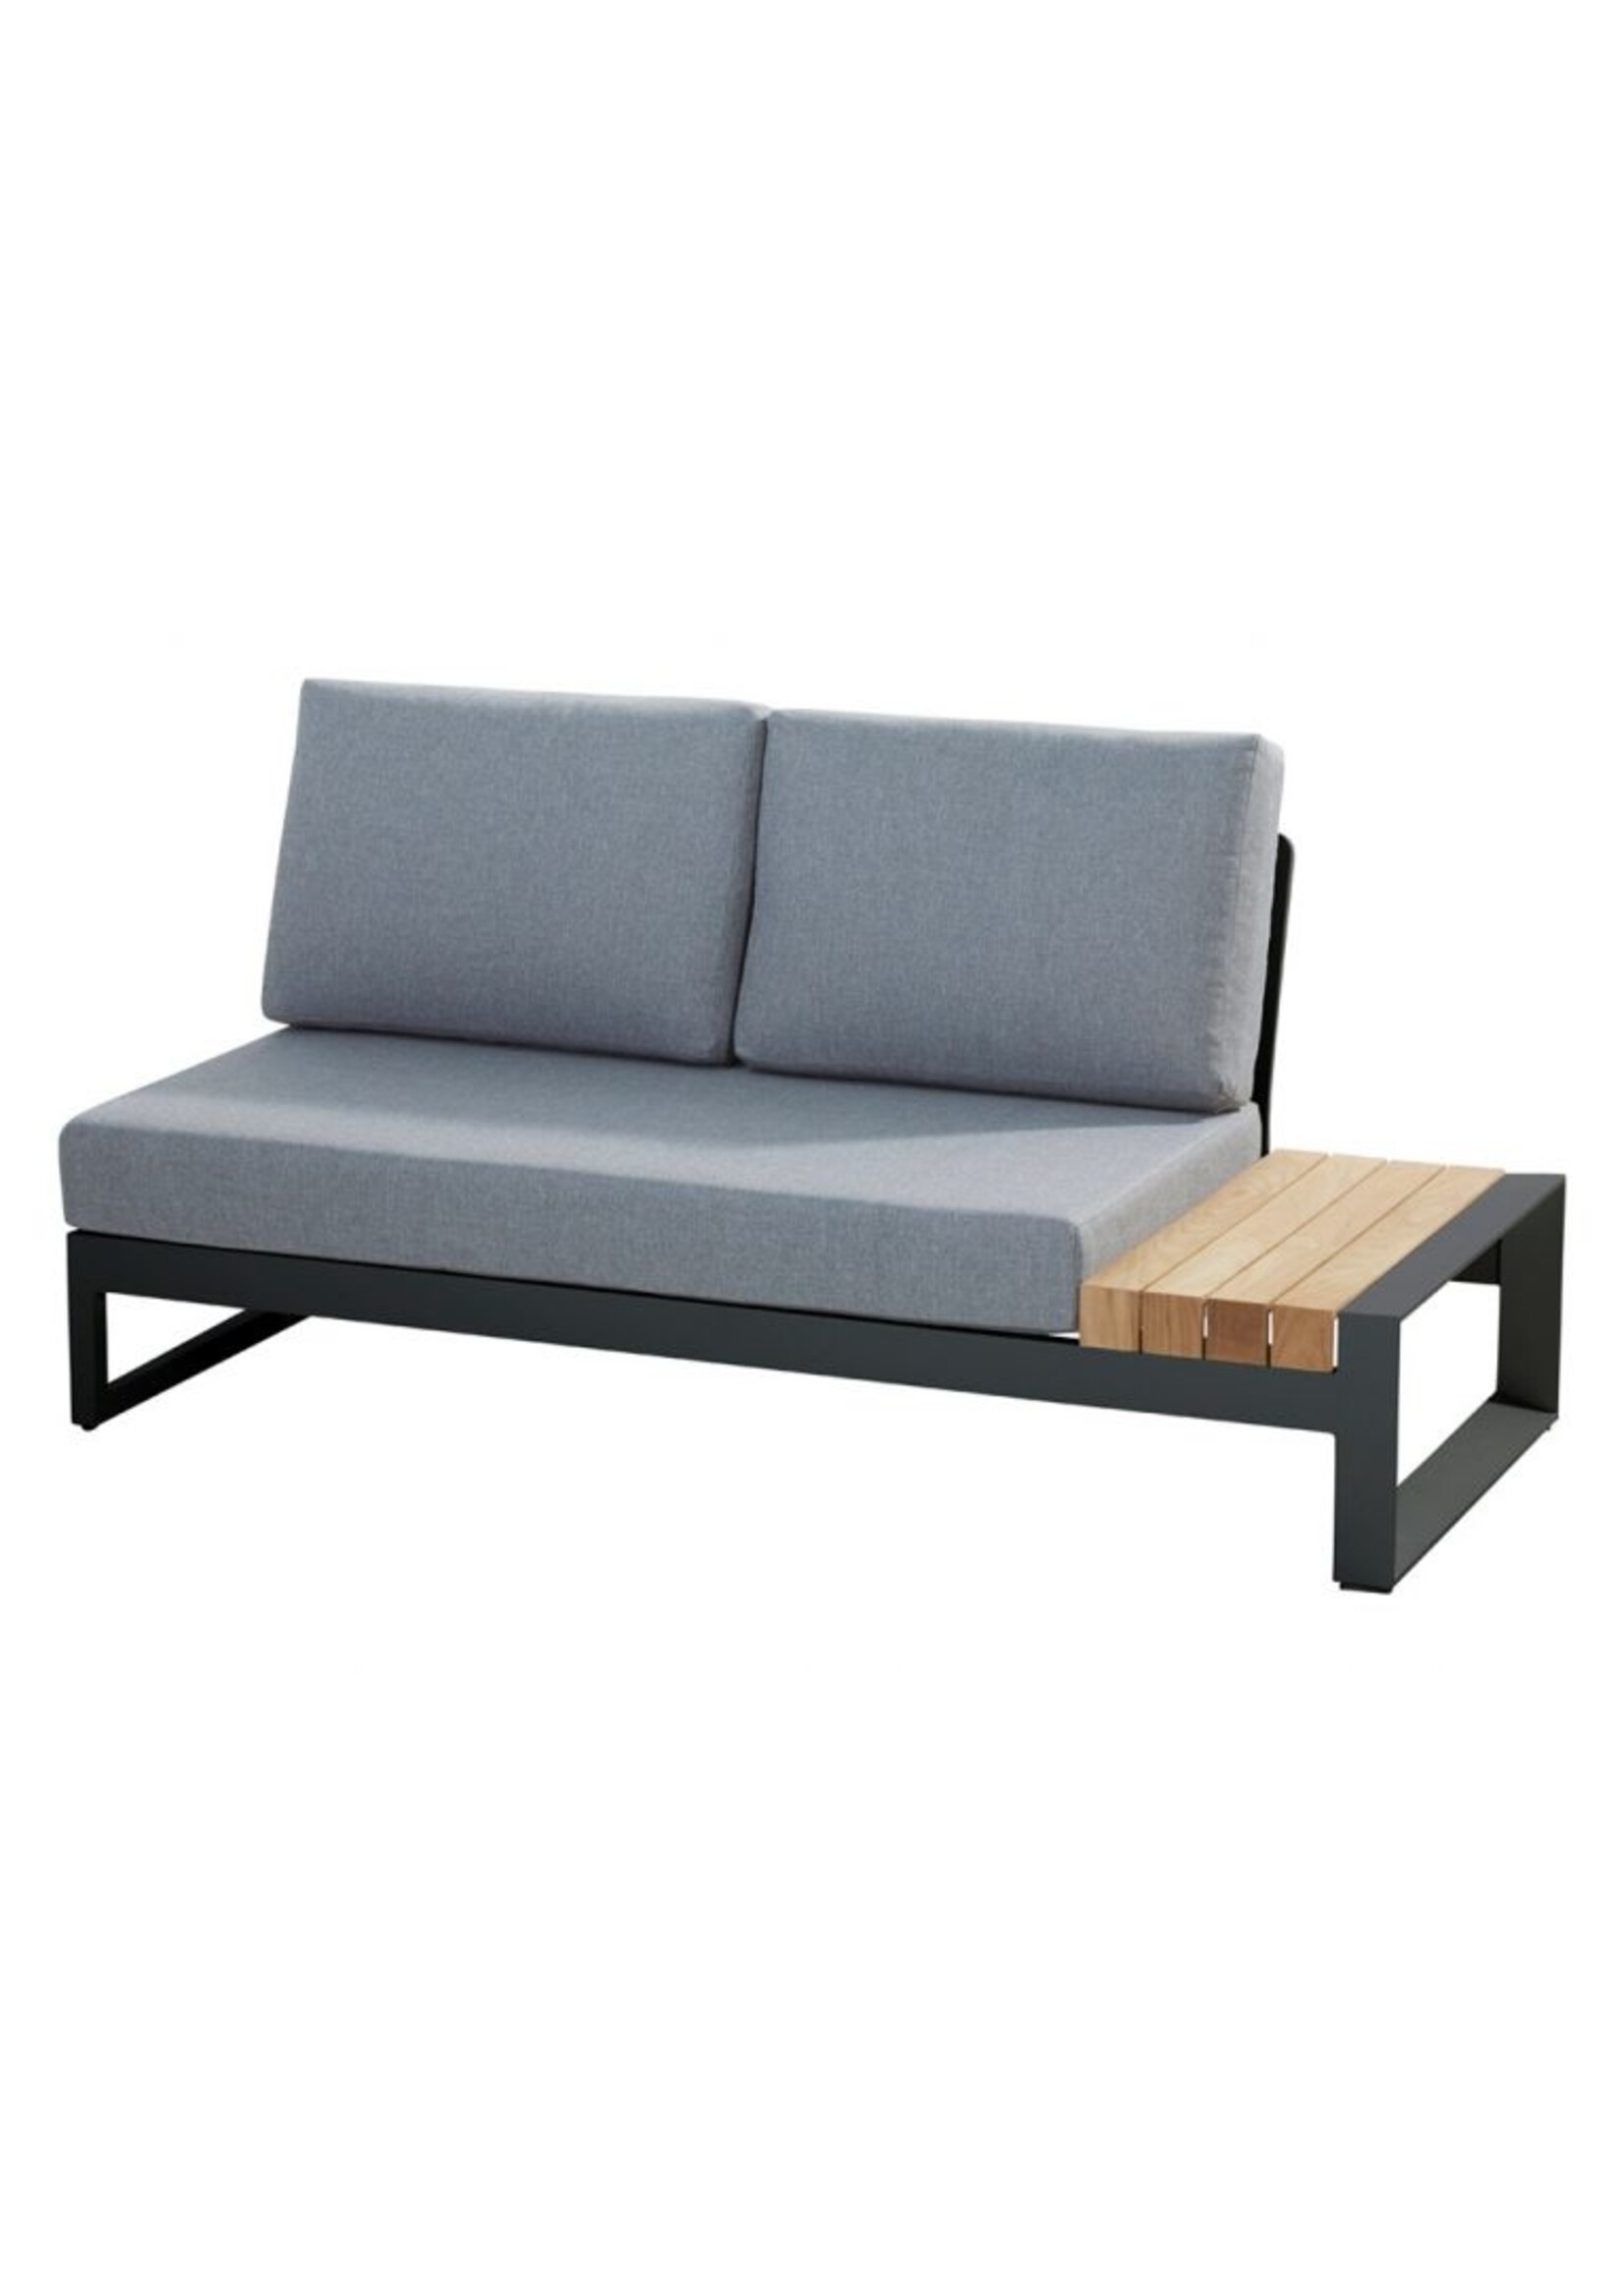 4SO 4SO Matisse modular 2 seater bench LEFT AND RIGHT  with 3 cushion ANTHRACITE